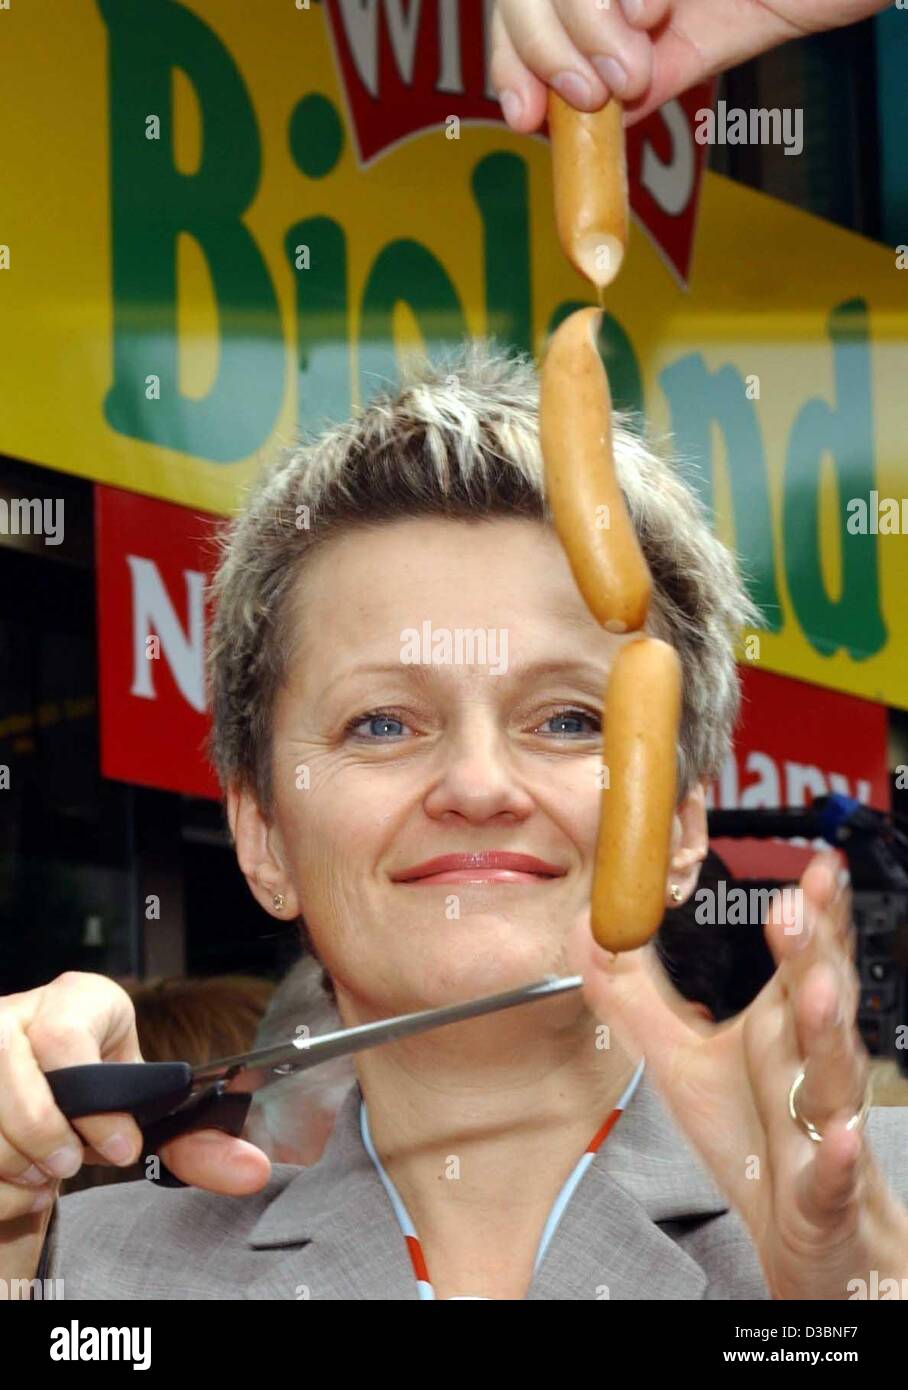 (dpa) - Renate Kuenast (Alliance 90/The Greens), German Minister for Consumer Protection, Food and Agriculture, uses a pair of scissors to cut sausages off a chain, Berlin, 21 May 2003. In the background is the 'Bioland' label, a cooperative of ecological farmers. According to the operator 'Witty's' Stock Photo